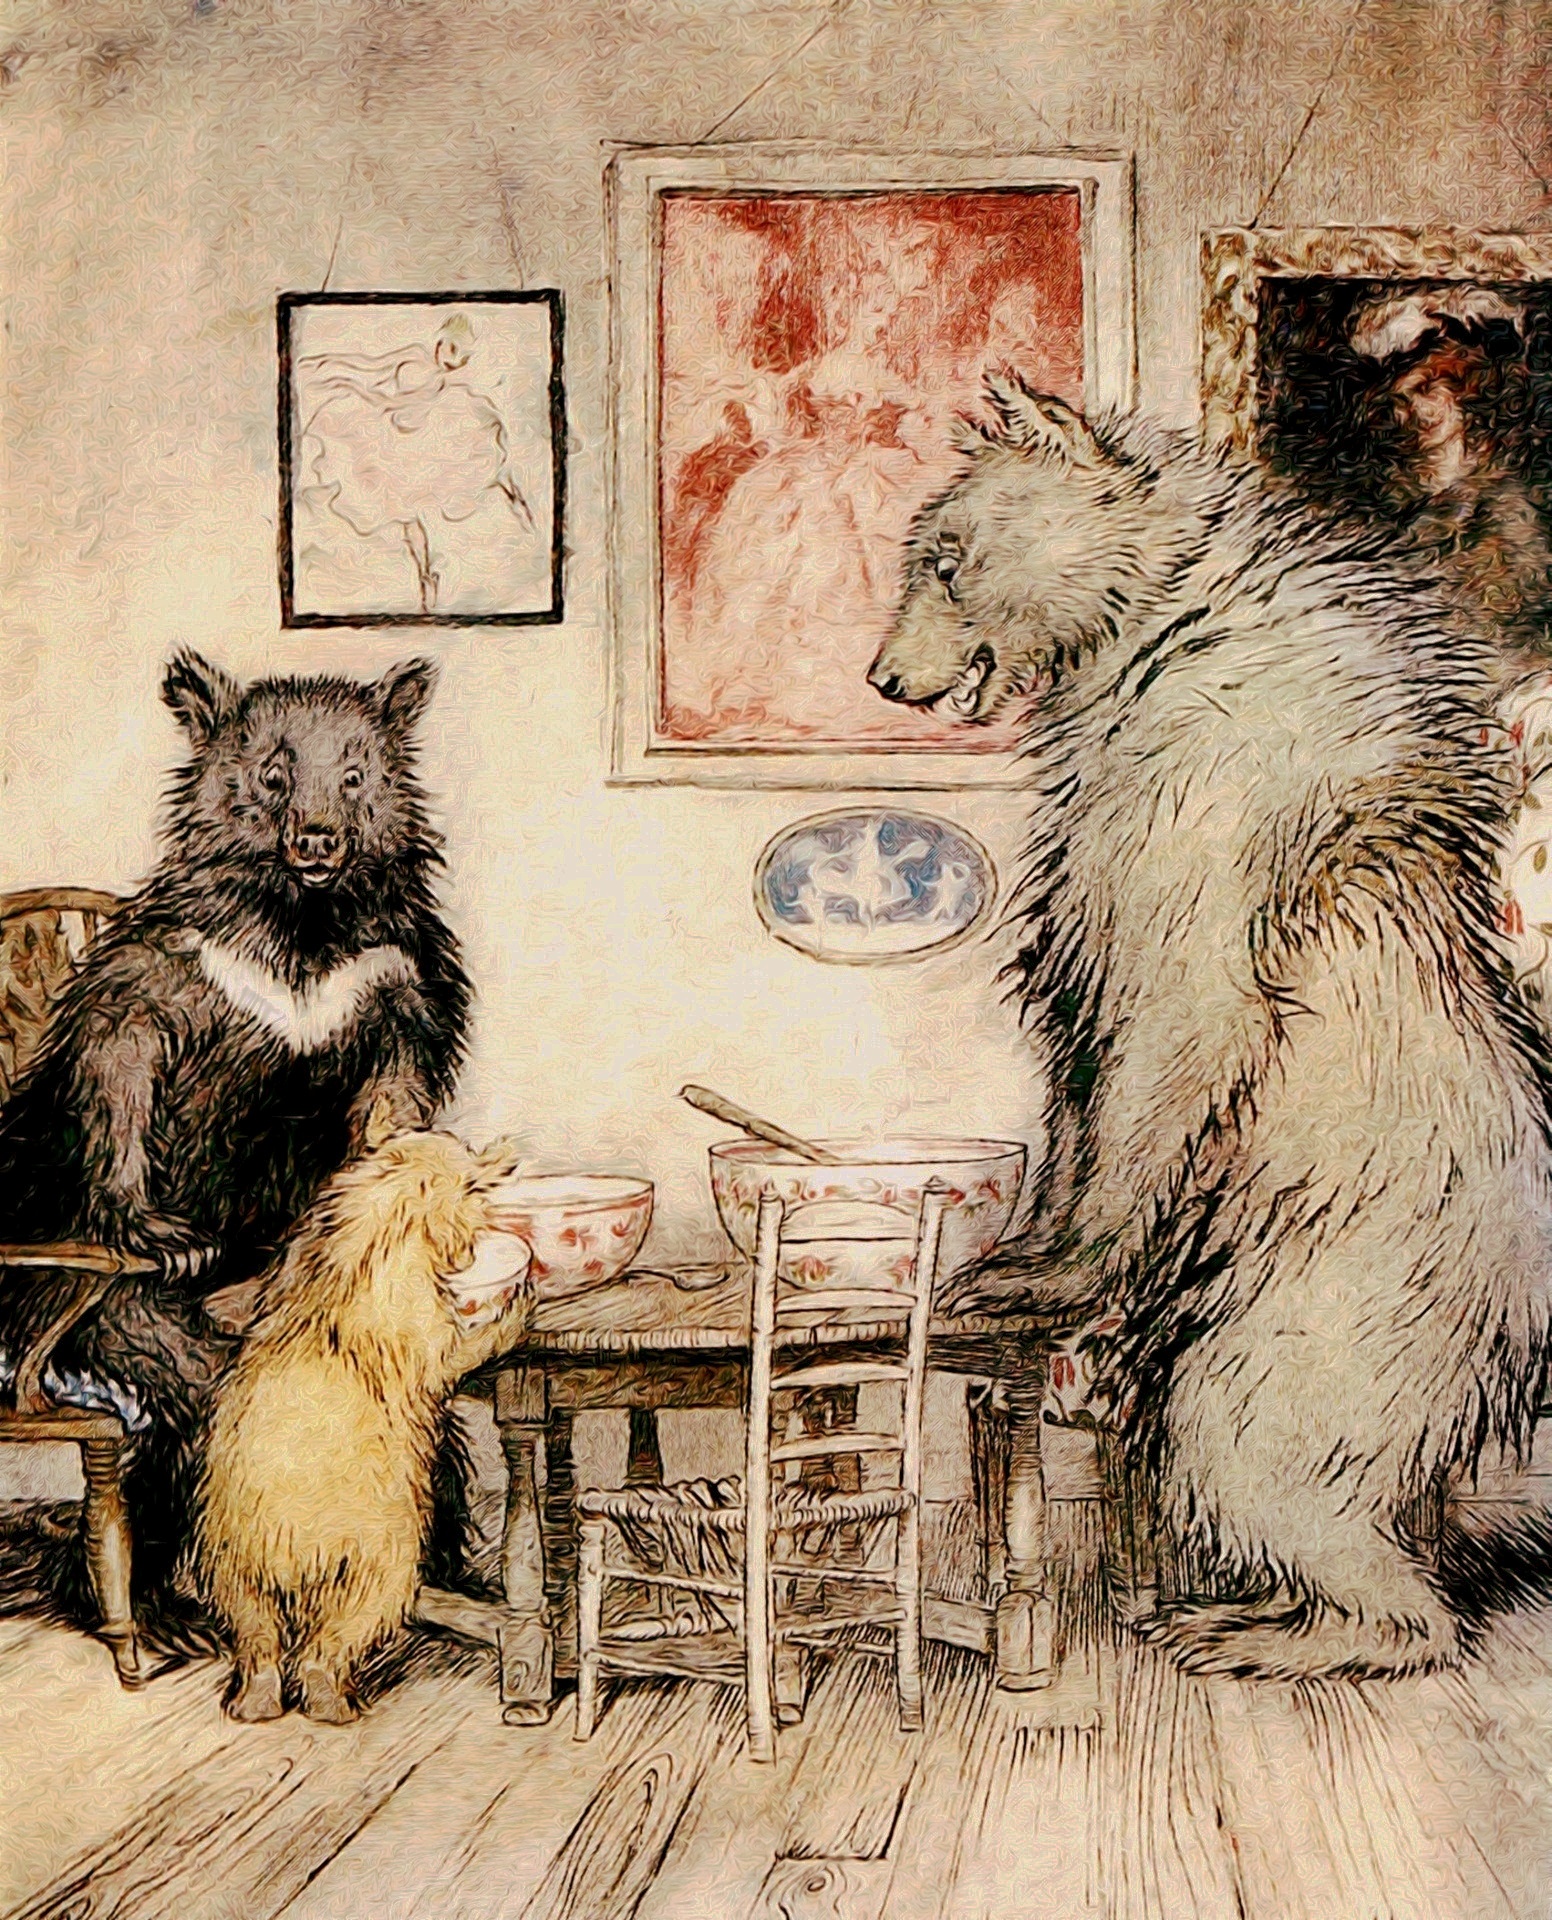 Cultural depictions of bears - Wikipedia